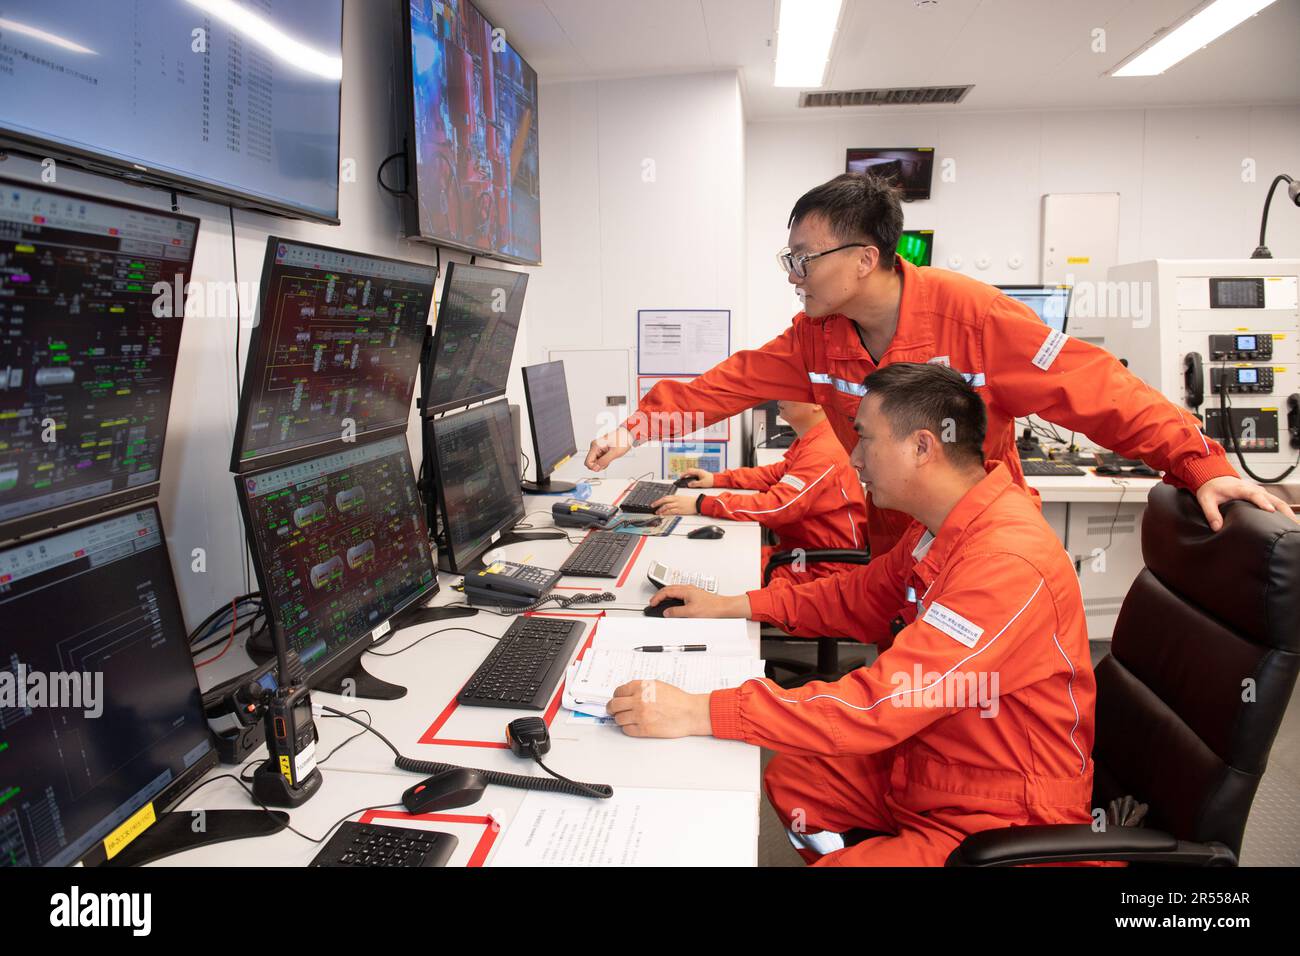 (230601) -- SHENZHEN, June 1, 2023 (Xinhua) -- Staff members work in the control room of the Enping 15-1 oil platform 200 km southwest of Shenzhen, south China, June 1, 2023. China's first offshore million-tonne carbon storage project was put into operation on Thursday in the South China Sea, according to the China National Offshore Oil Corporation (CNOOC). The project is designed to store a total of more than 1.5 million tonnes of carbon dioxide (CO2), which is equivalent to planting nearly 14 million trees, according to the company. The project, serving the Enping 15-1 oil platform 2 Stock Photo